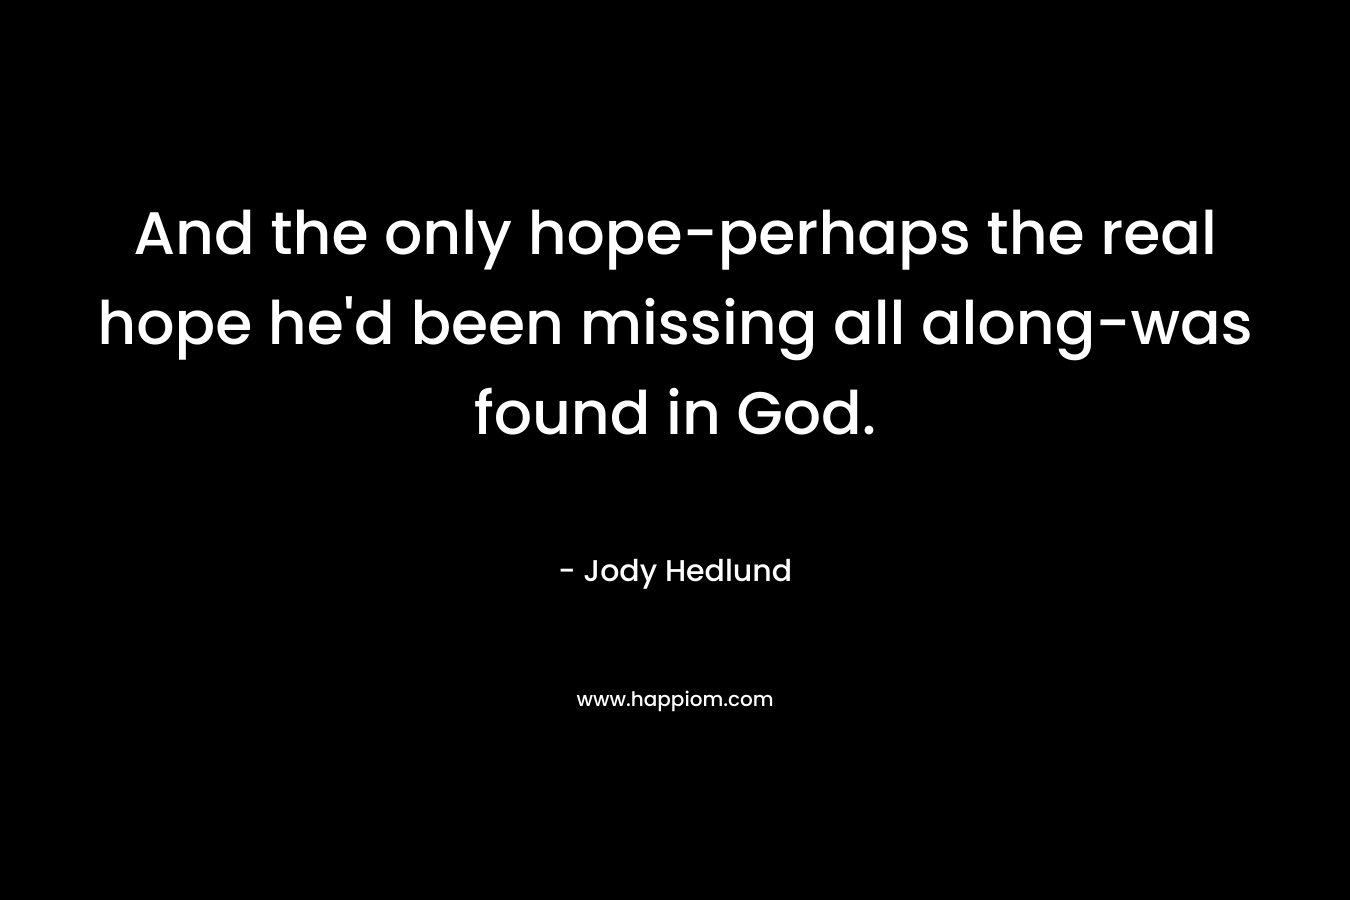 And the only hope-perhaps the real hope he’d been missing all along-was found in God. – Jody Hedlund